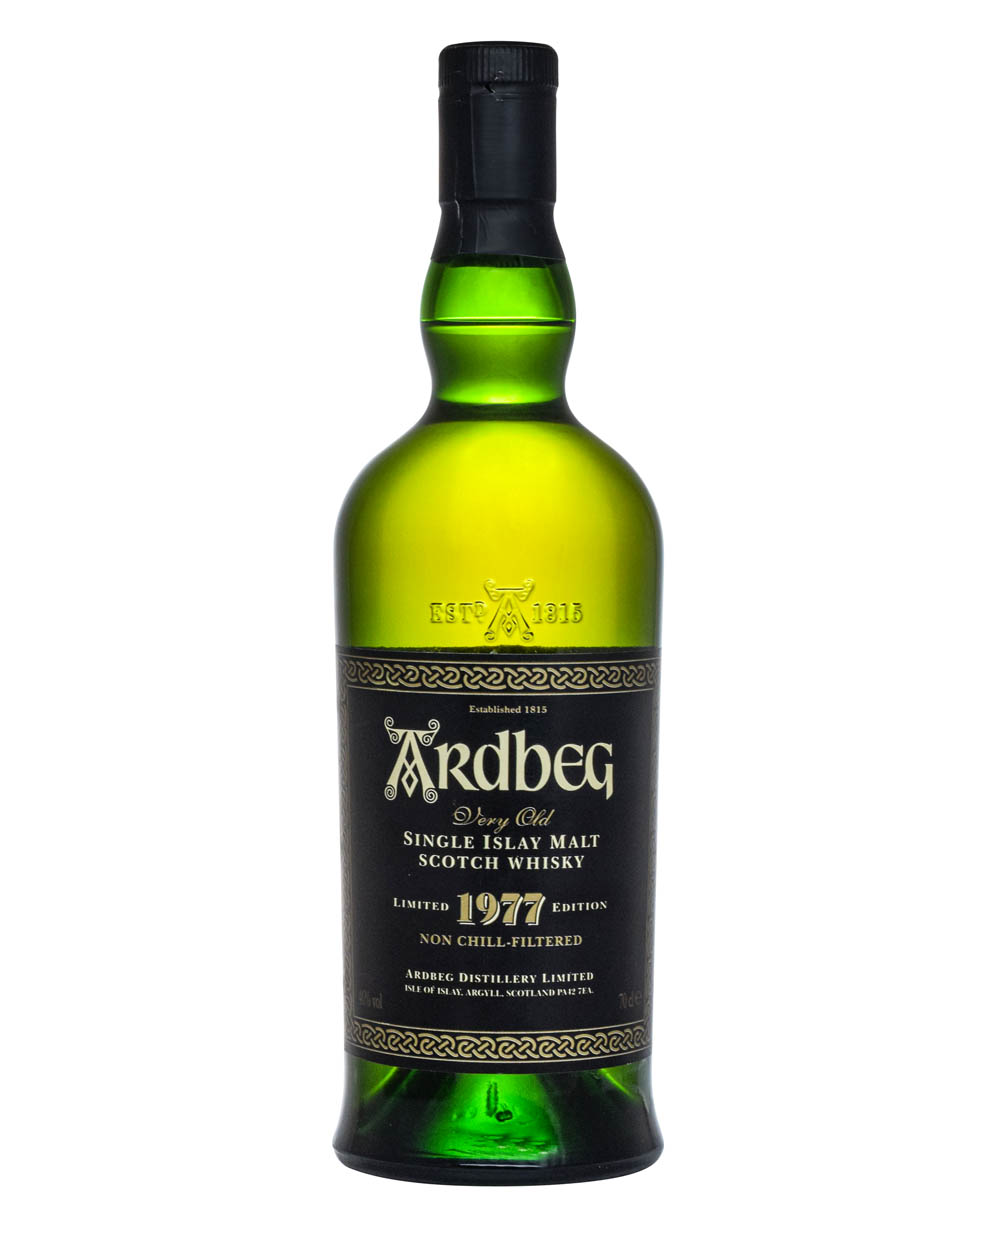 Ardbeg Limited 1977 Edition Musthave Malts MHM